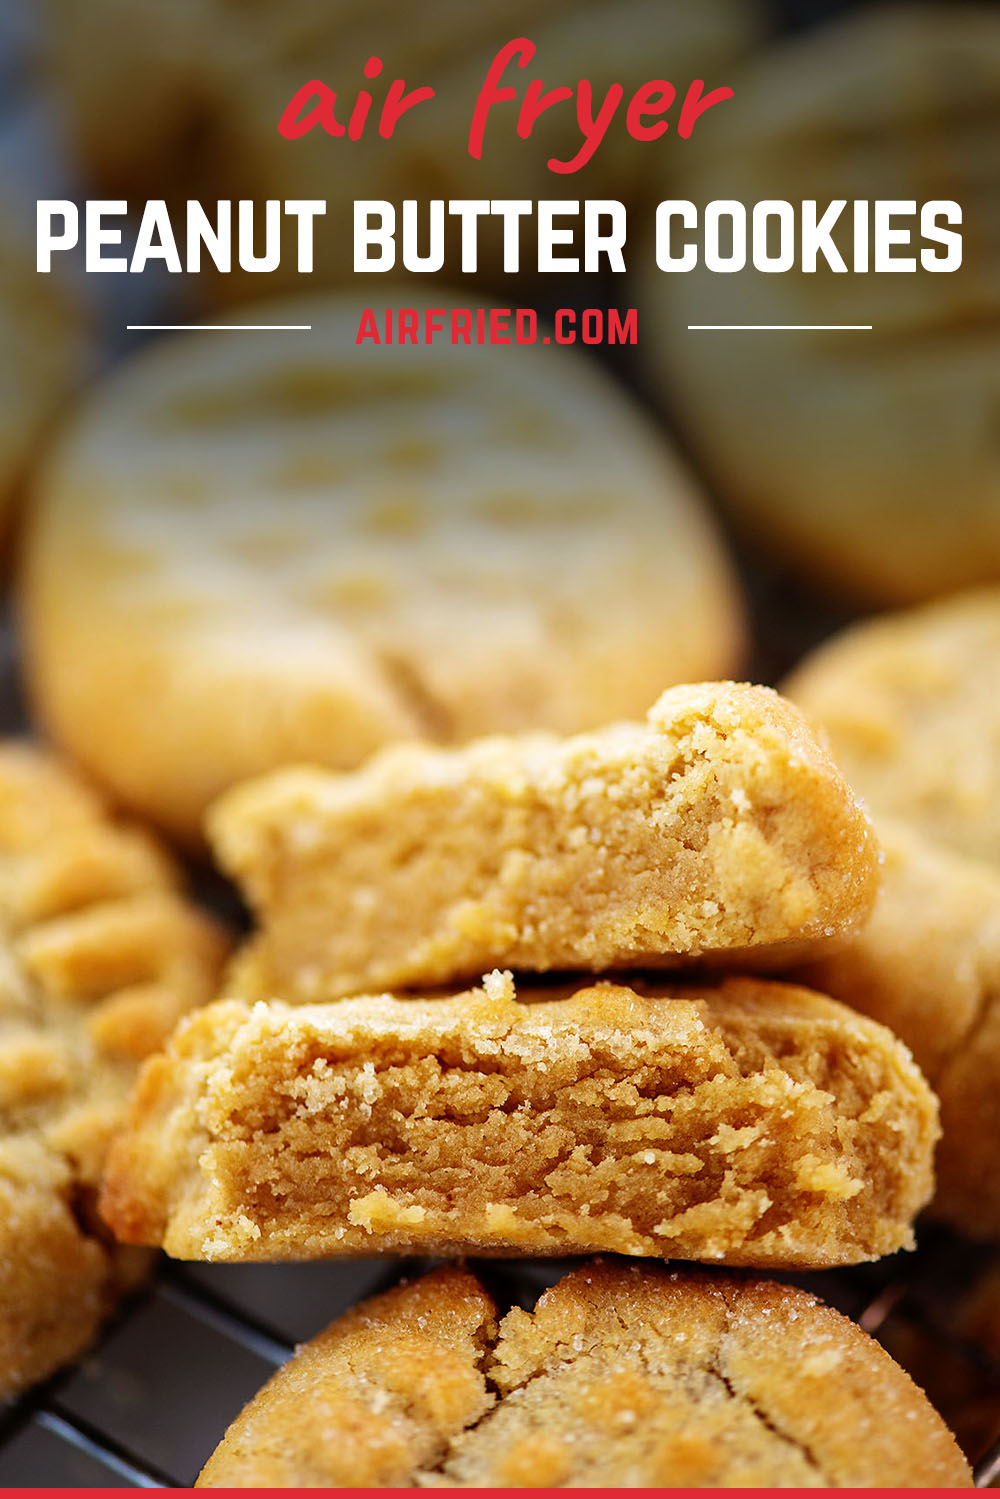 It only takes 5 minutes in your air fryer to get fantastic peanut butter cookies!  Check out our tips to make them perfect!